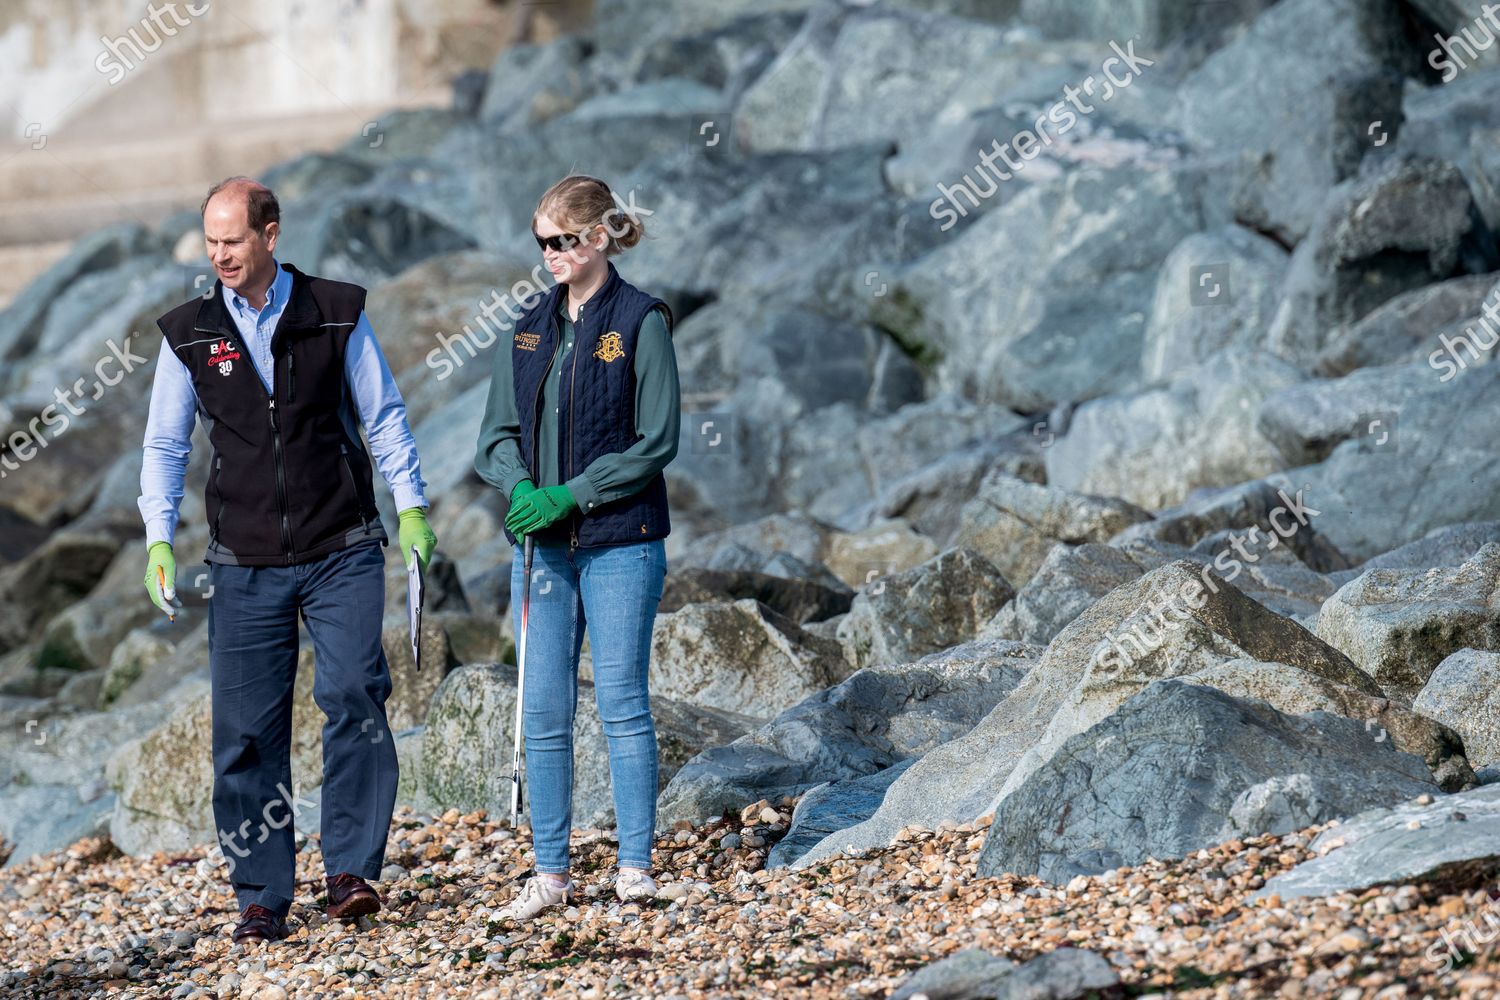 prince-edward-and-sophie-countess-of-wessex-great-british-beach-clean-southsea-beach-portsmouth-uk-shutterstock-editorial-10782998cr.jpg